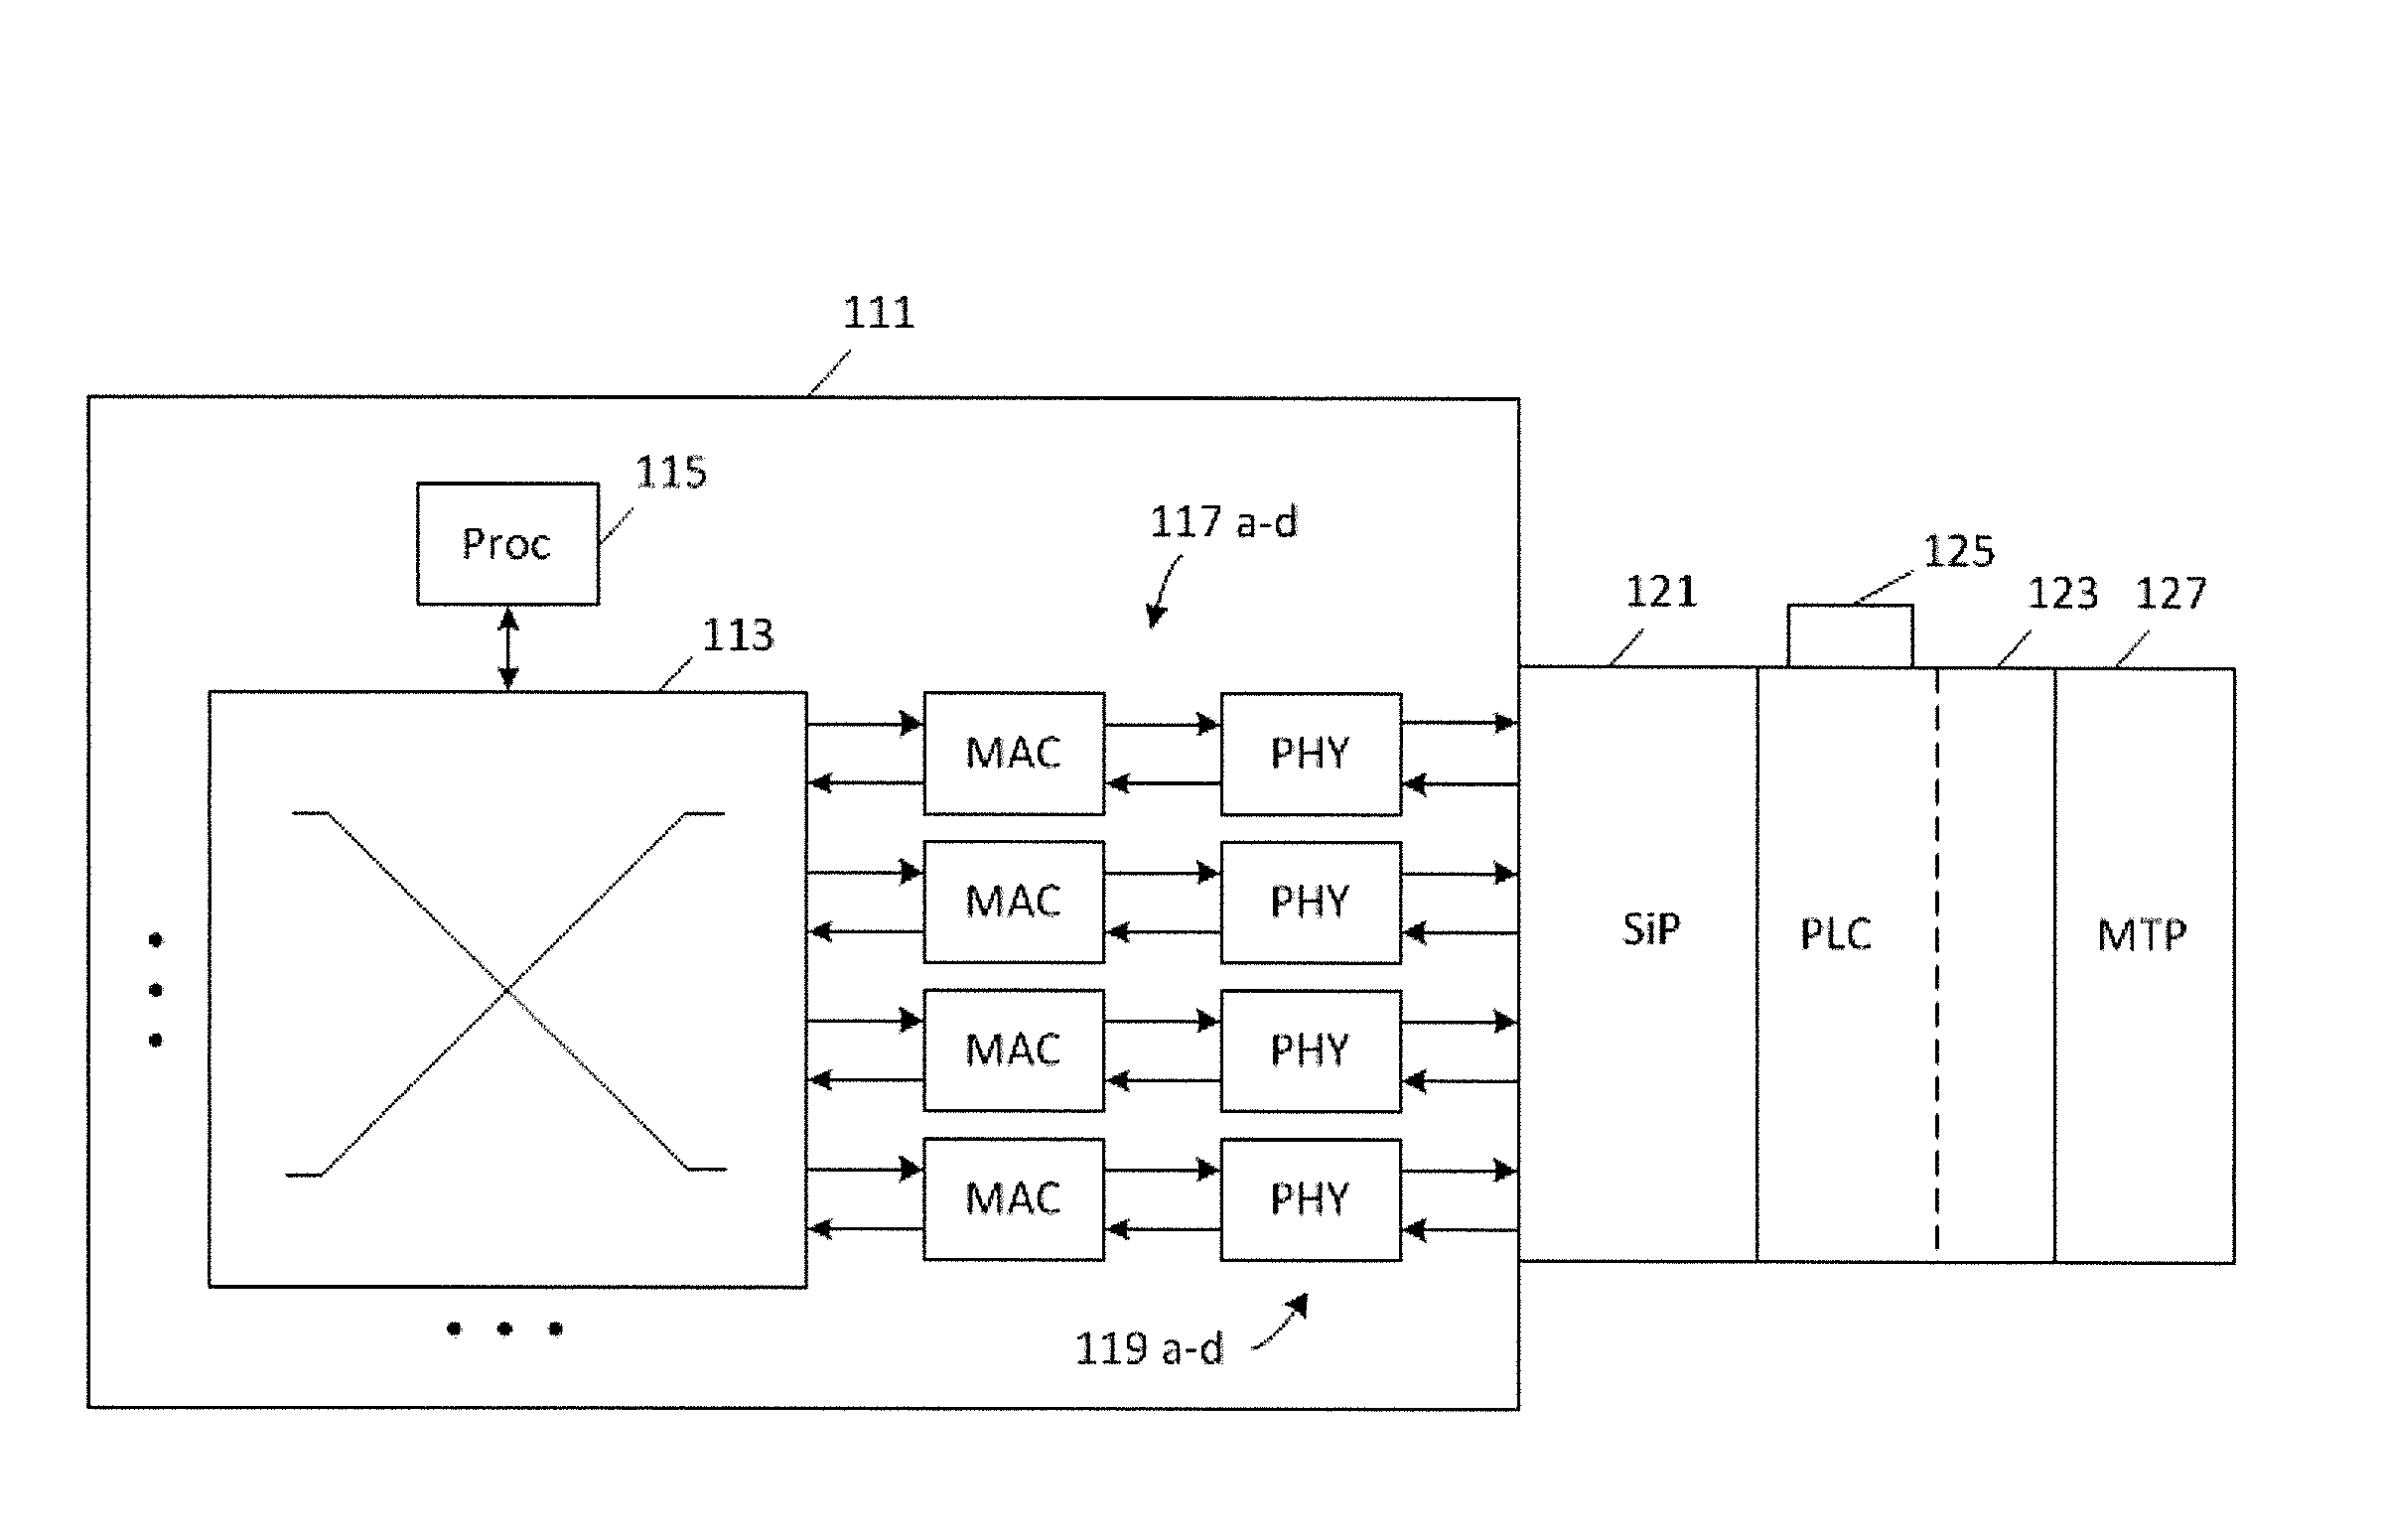 Optical interconnect for switch applications